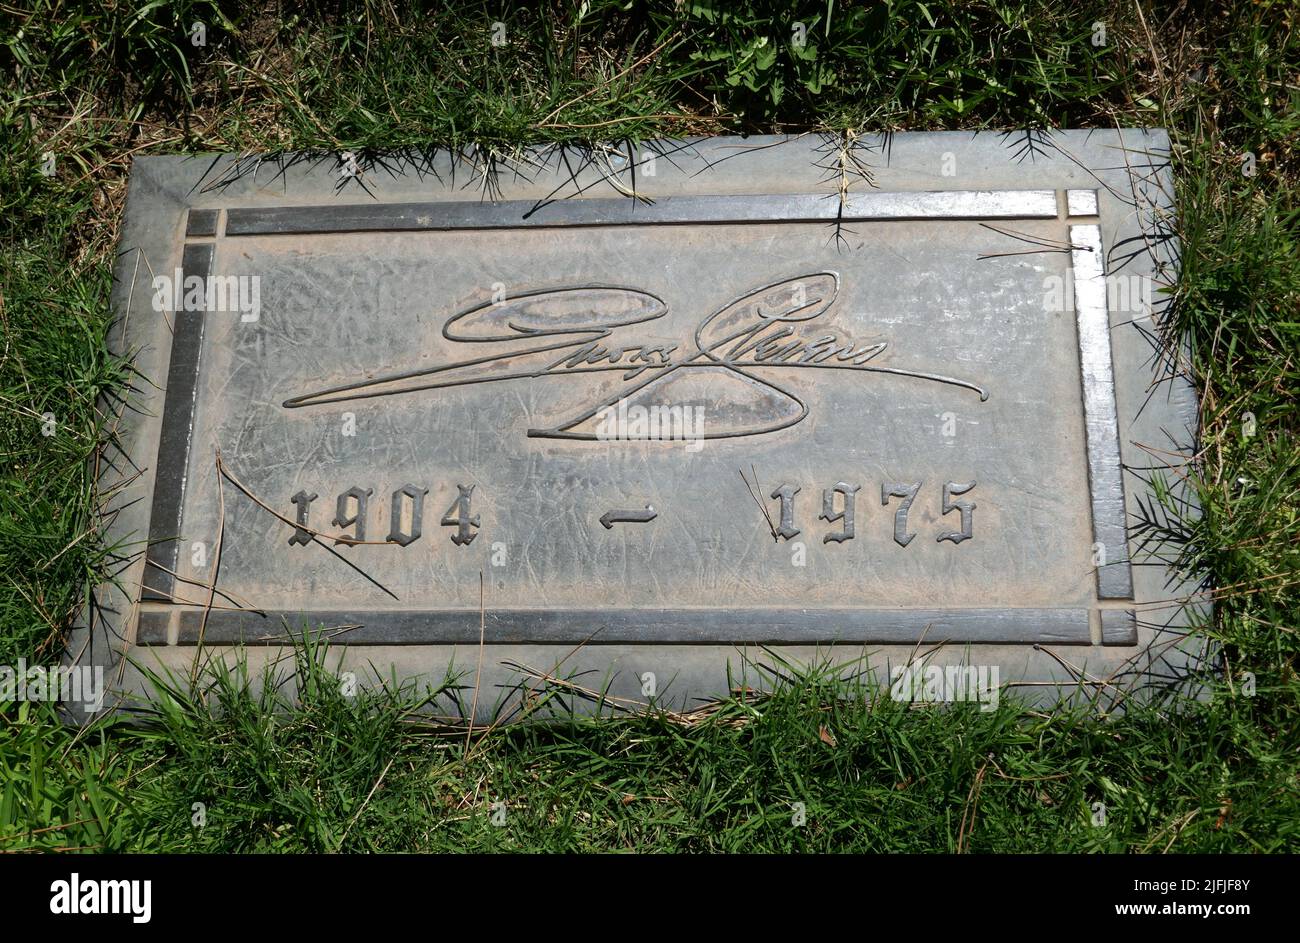 Los Angeles, California, USA 19th June 2022 Director George Stevens Grave in Morning Light Section at Forest Lawn Memorial Park Hollywood Hills on June 19, 2022 in Los Angeles, California, USA. Photo by Barry King/Alamy Stock Photo Stock Photo